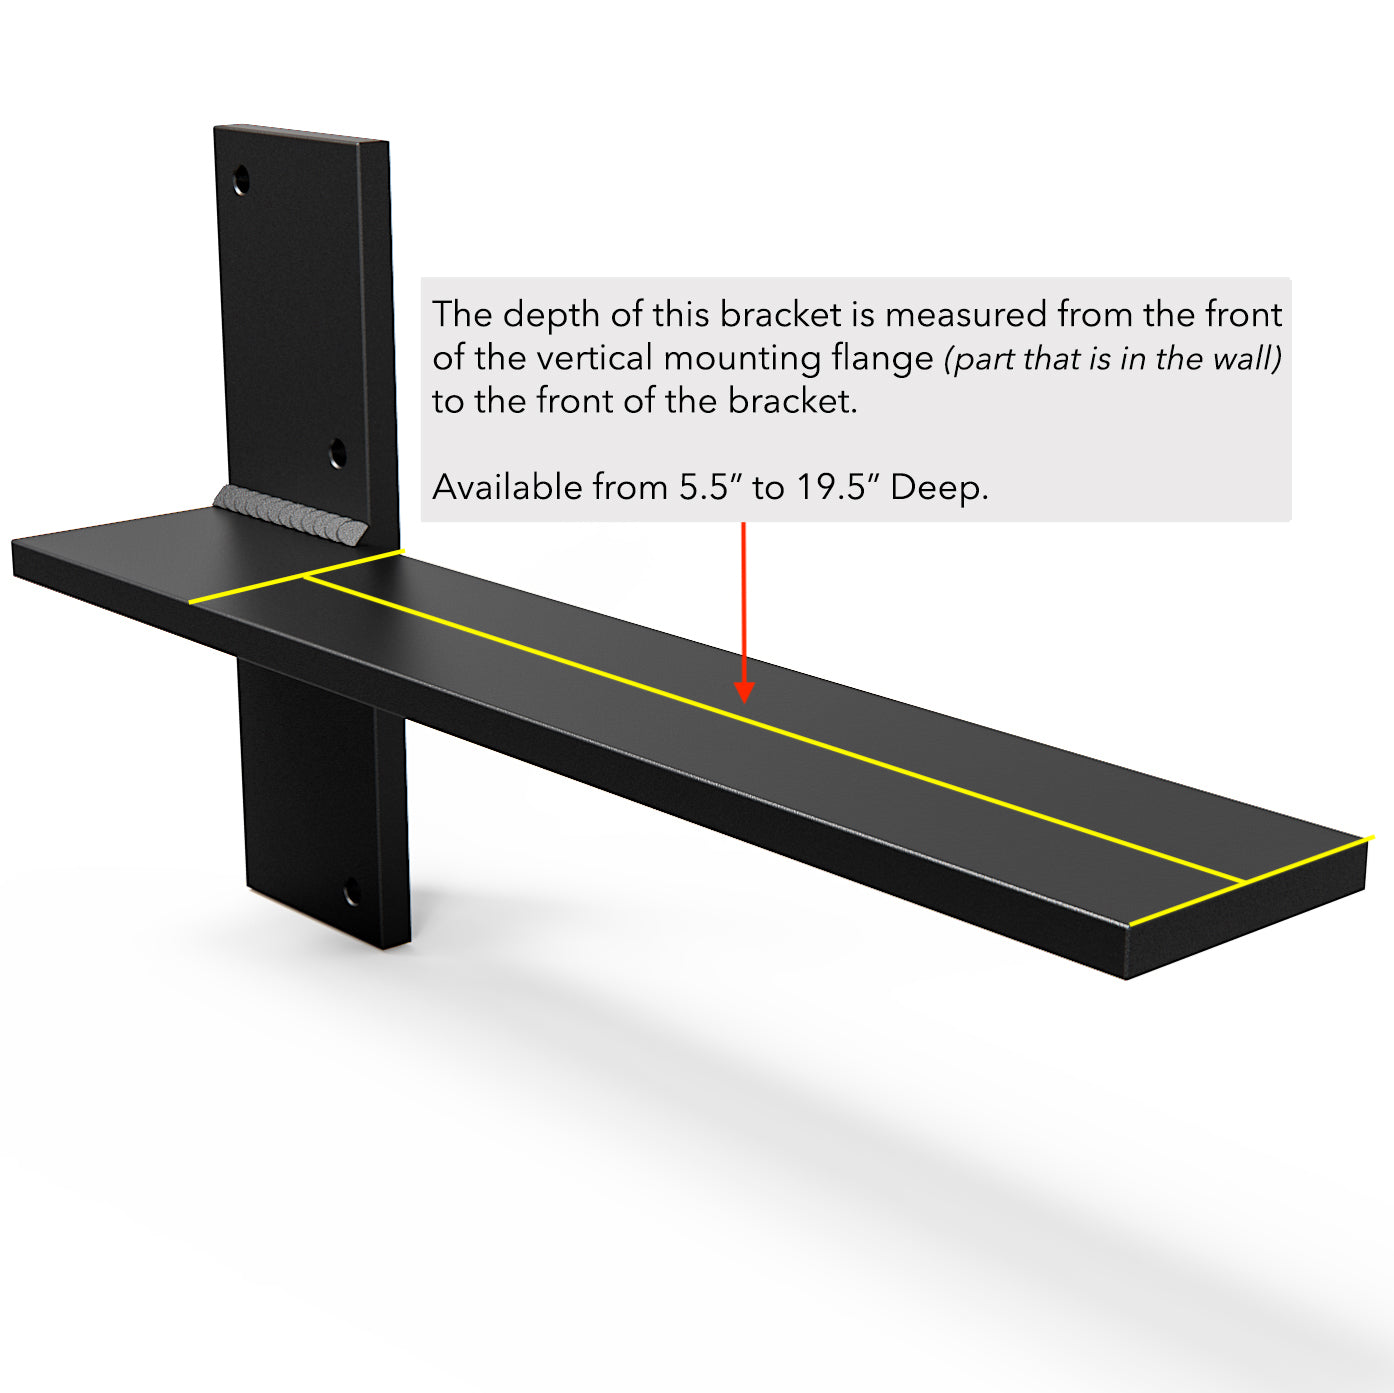 Floating Countertop Wall Bracket with annotated measurements. Provides detailed specifications for installation and support.